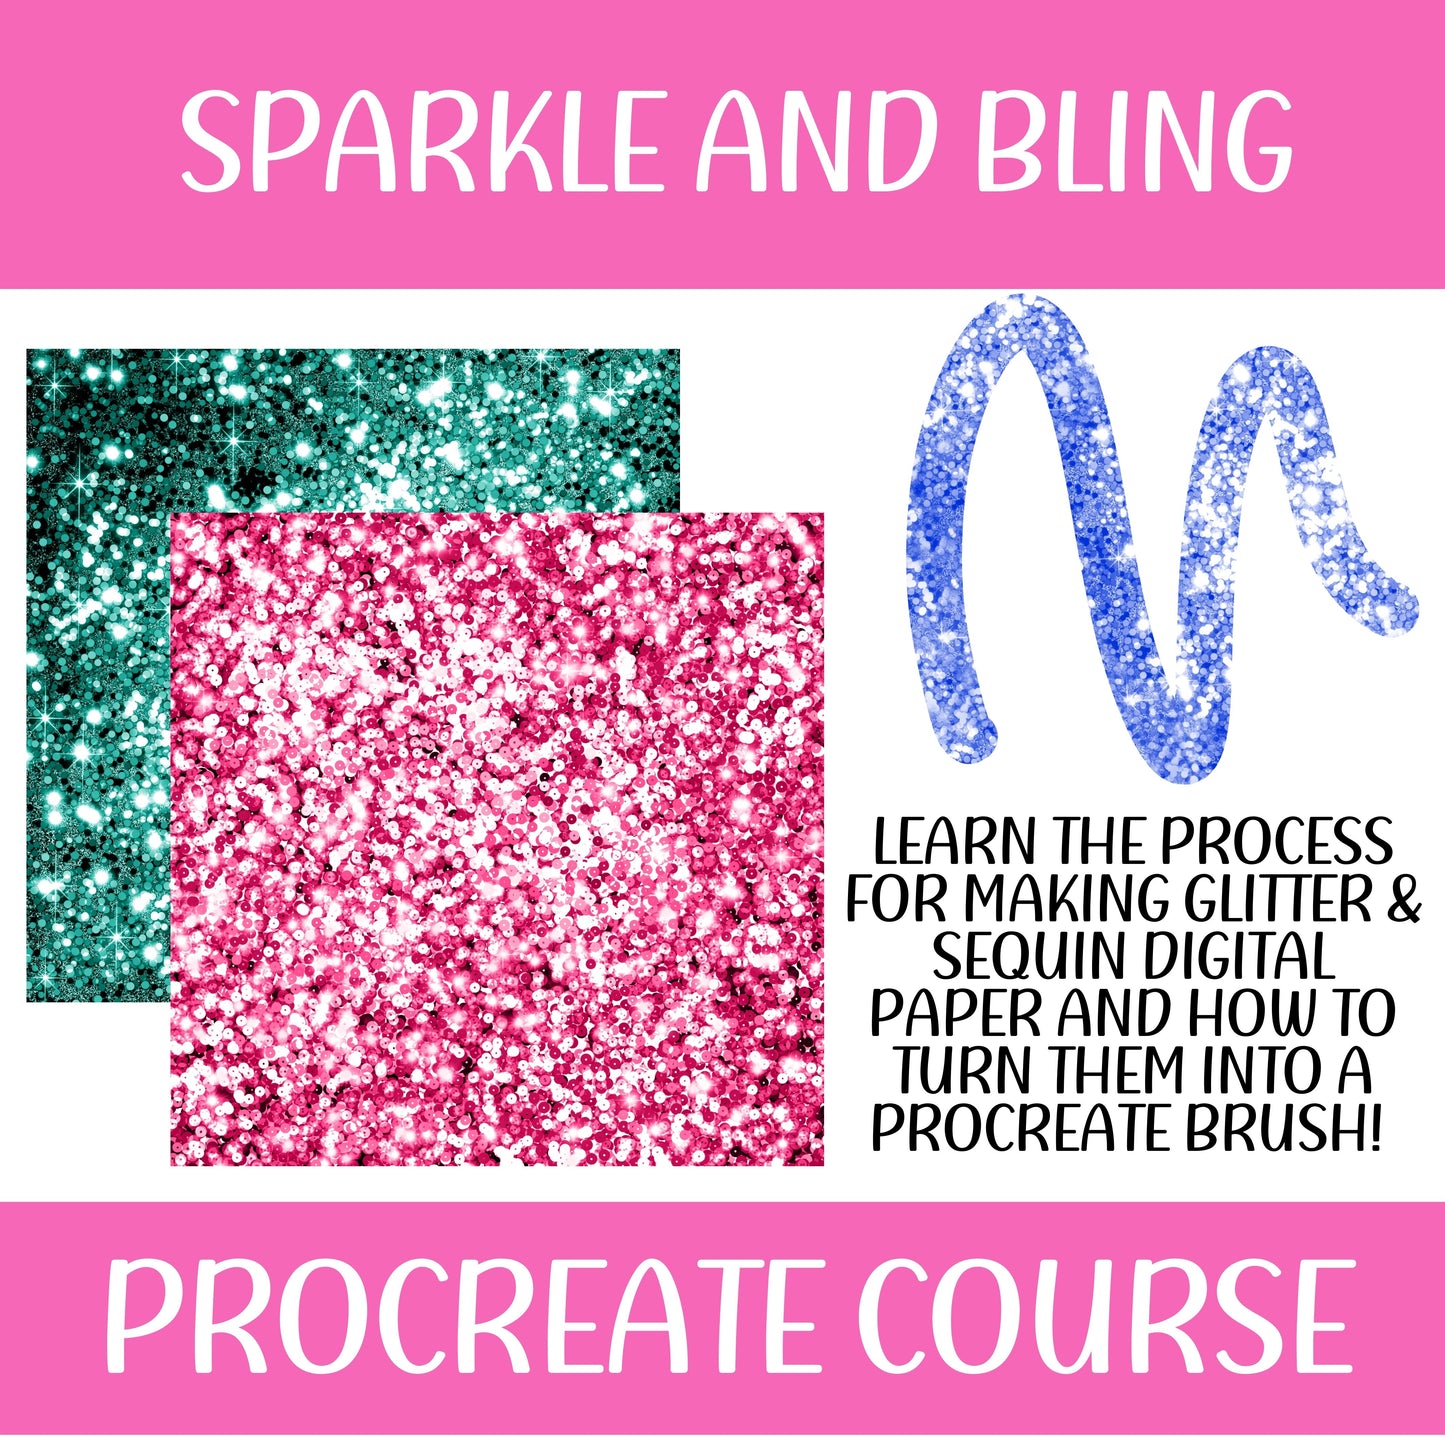 SPARKLE AND BLING PROCREATE COURSE